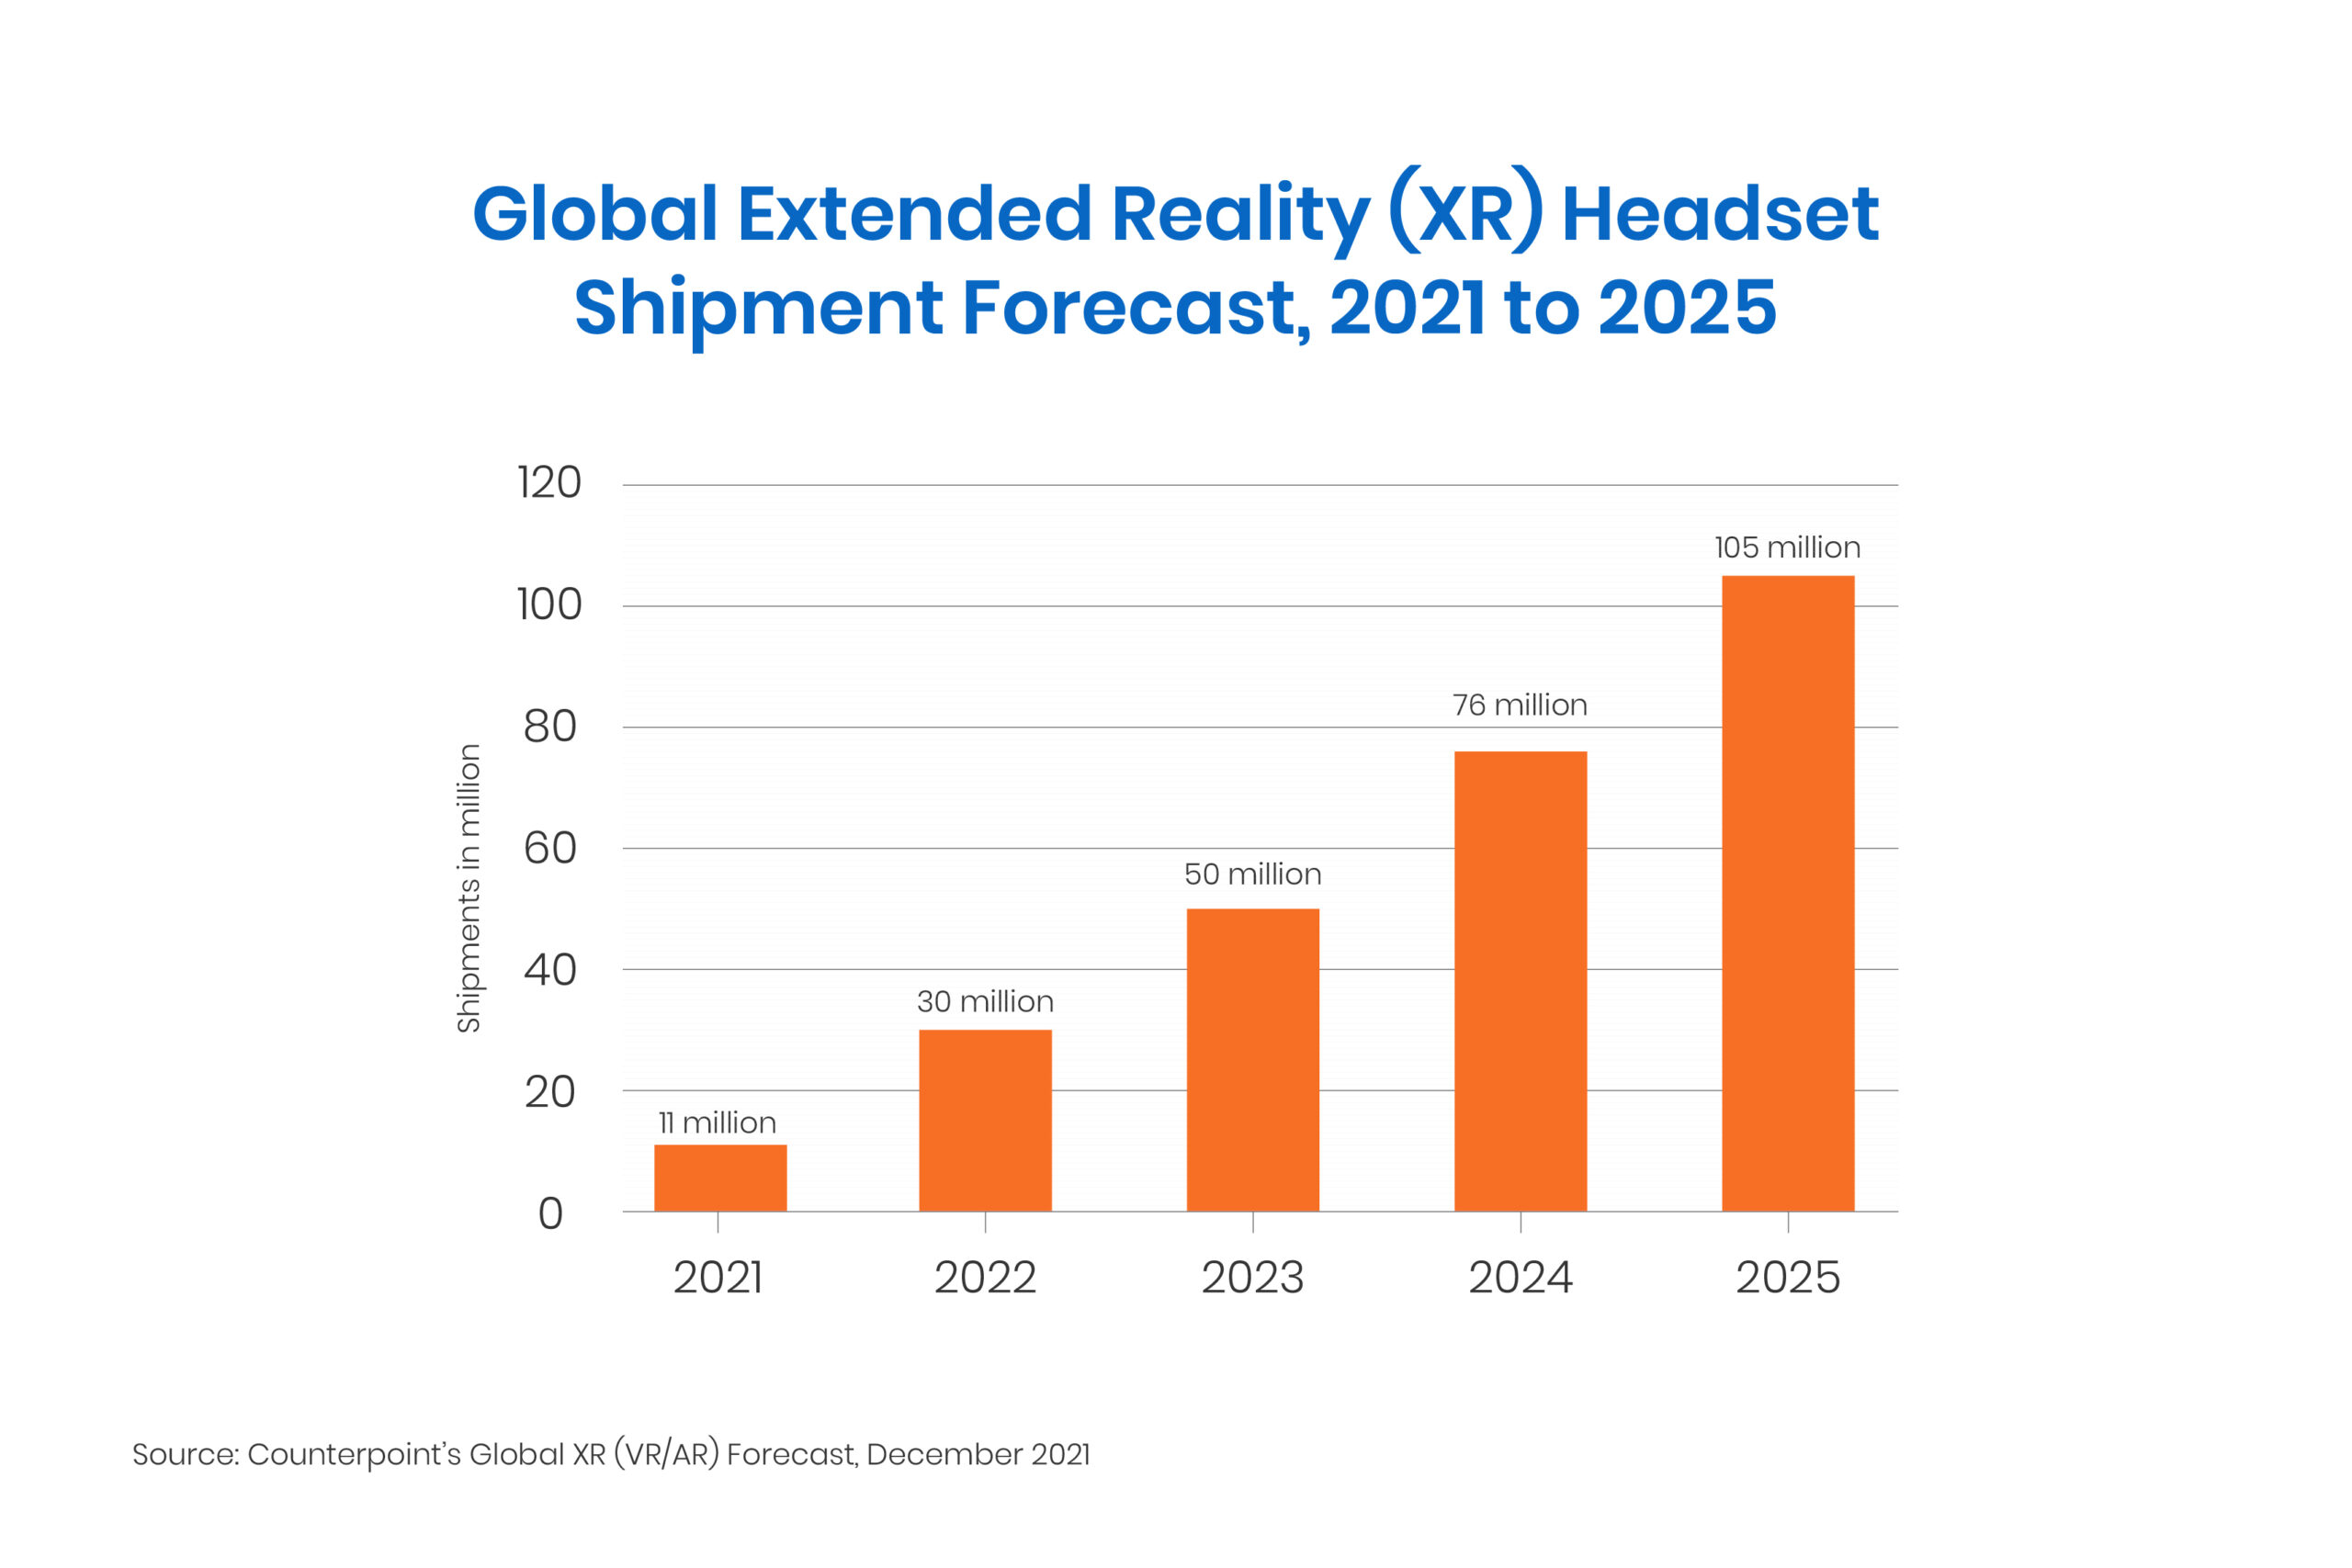 Global Extended Reality (XR) Headset Shipment Forecast, 2021 to 2025